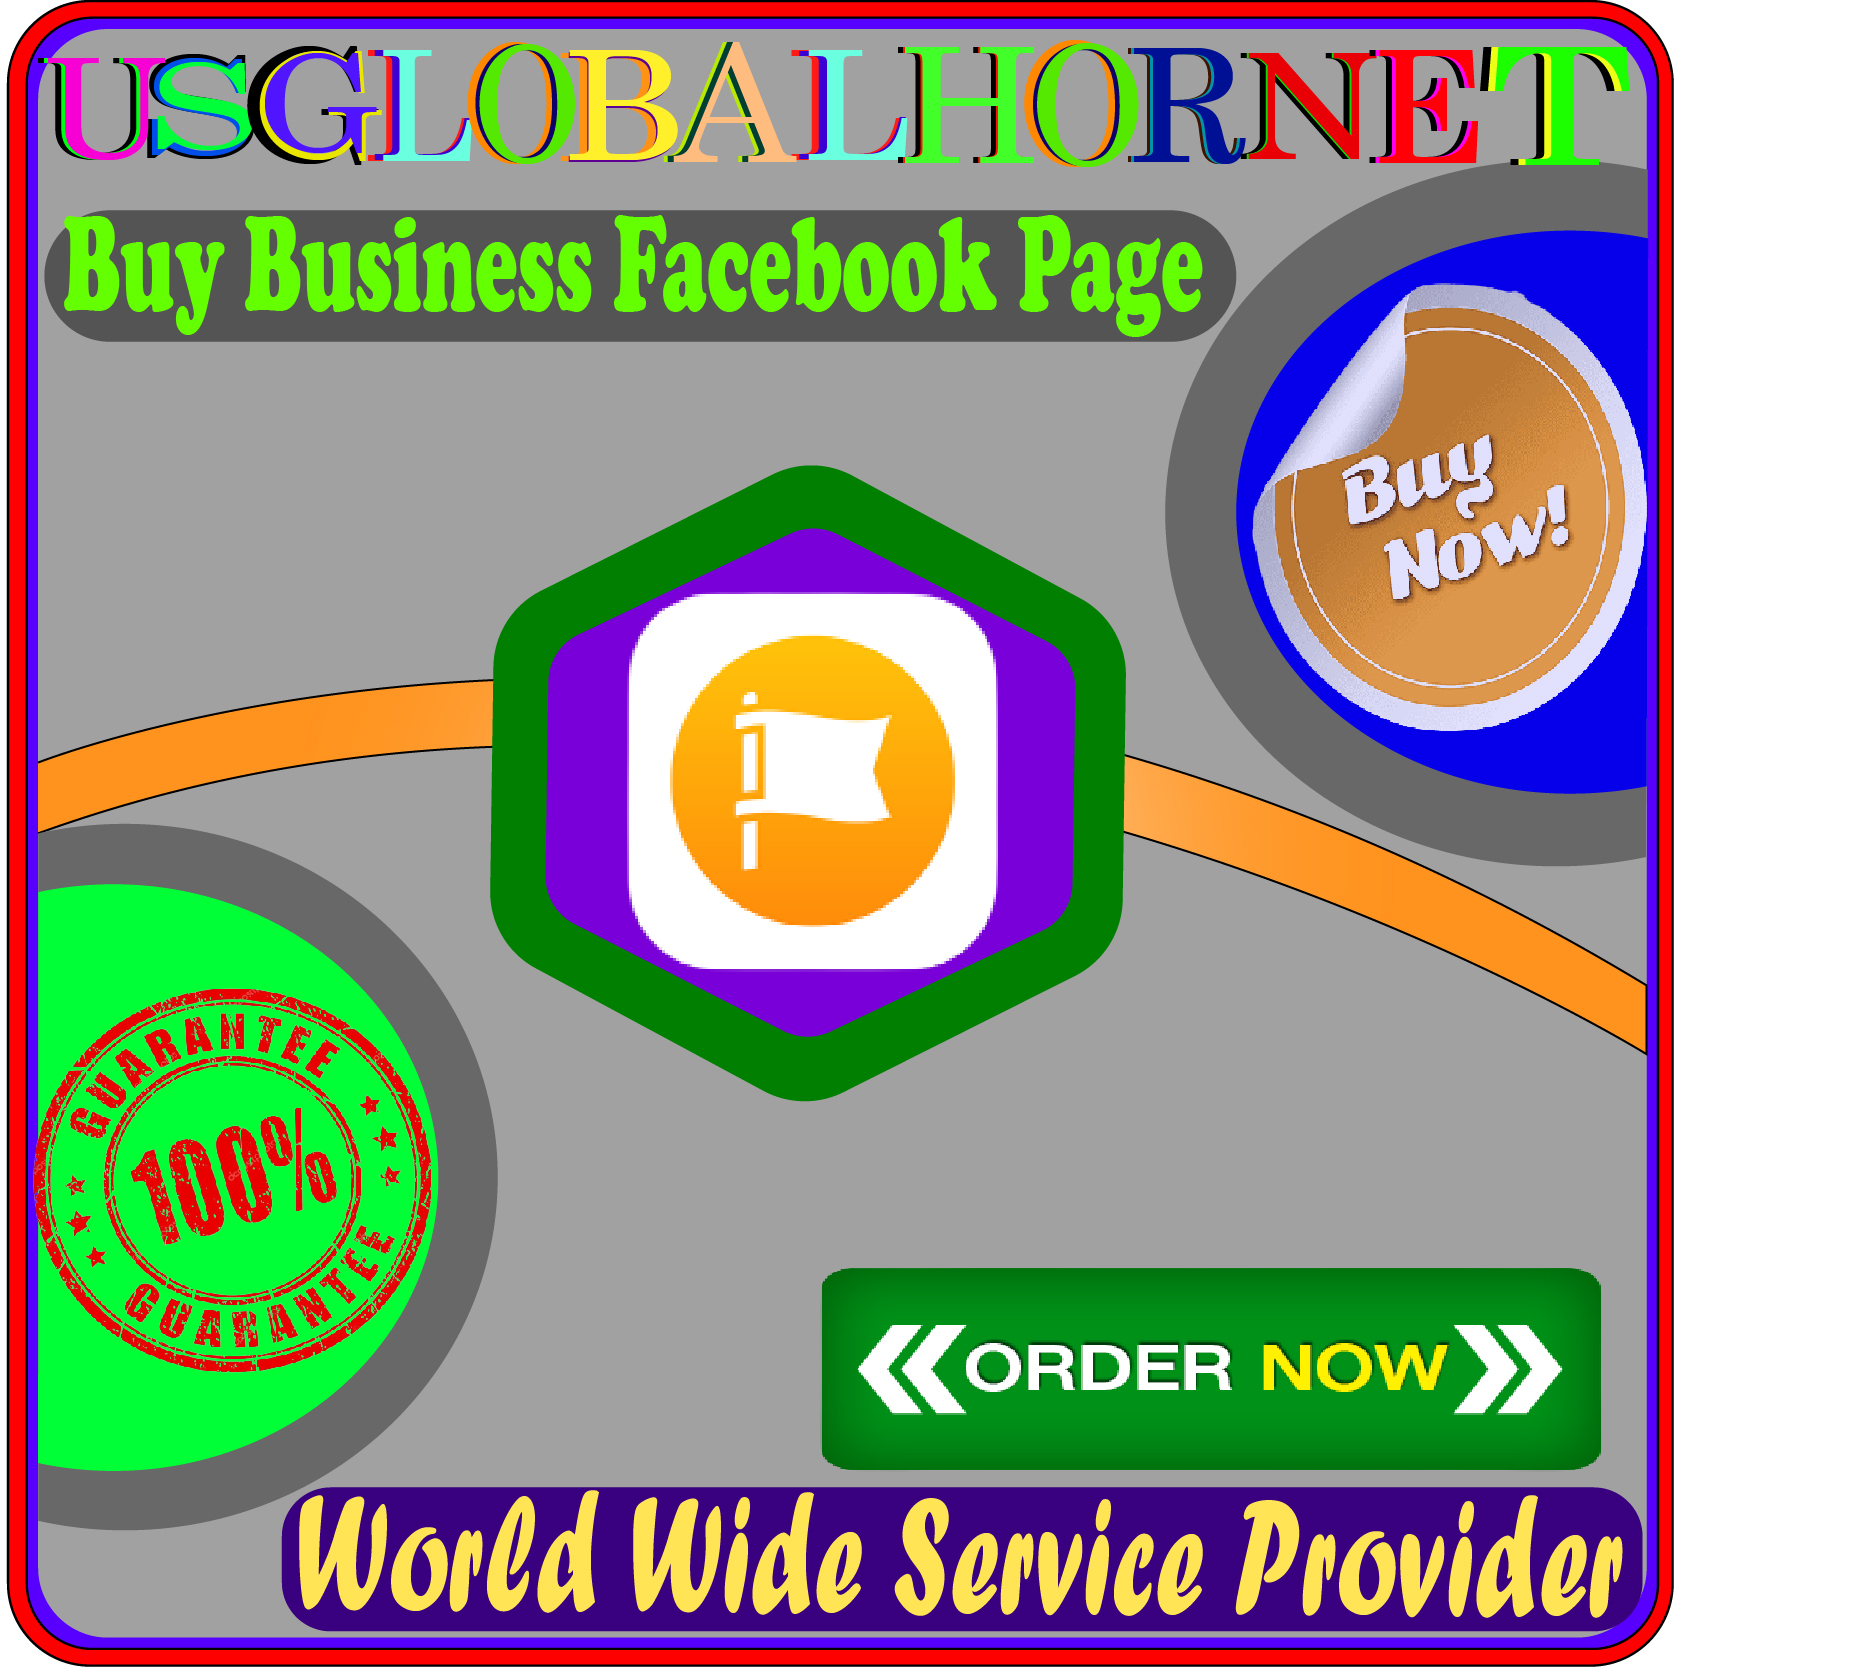 Buy Business Facebook Page -and grow your business properly